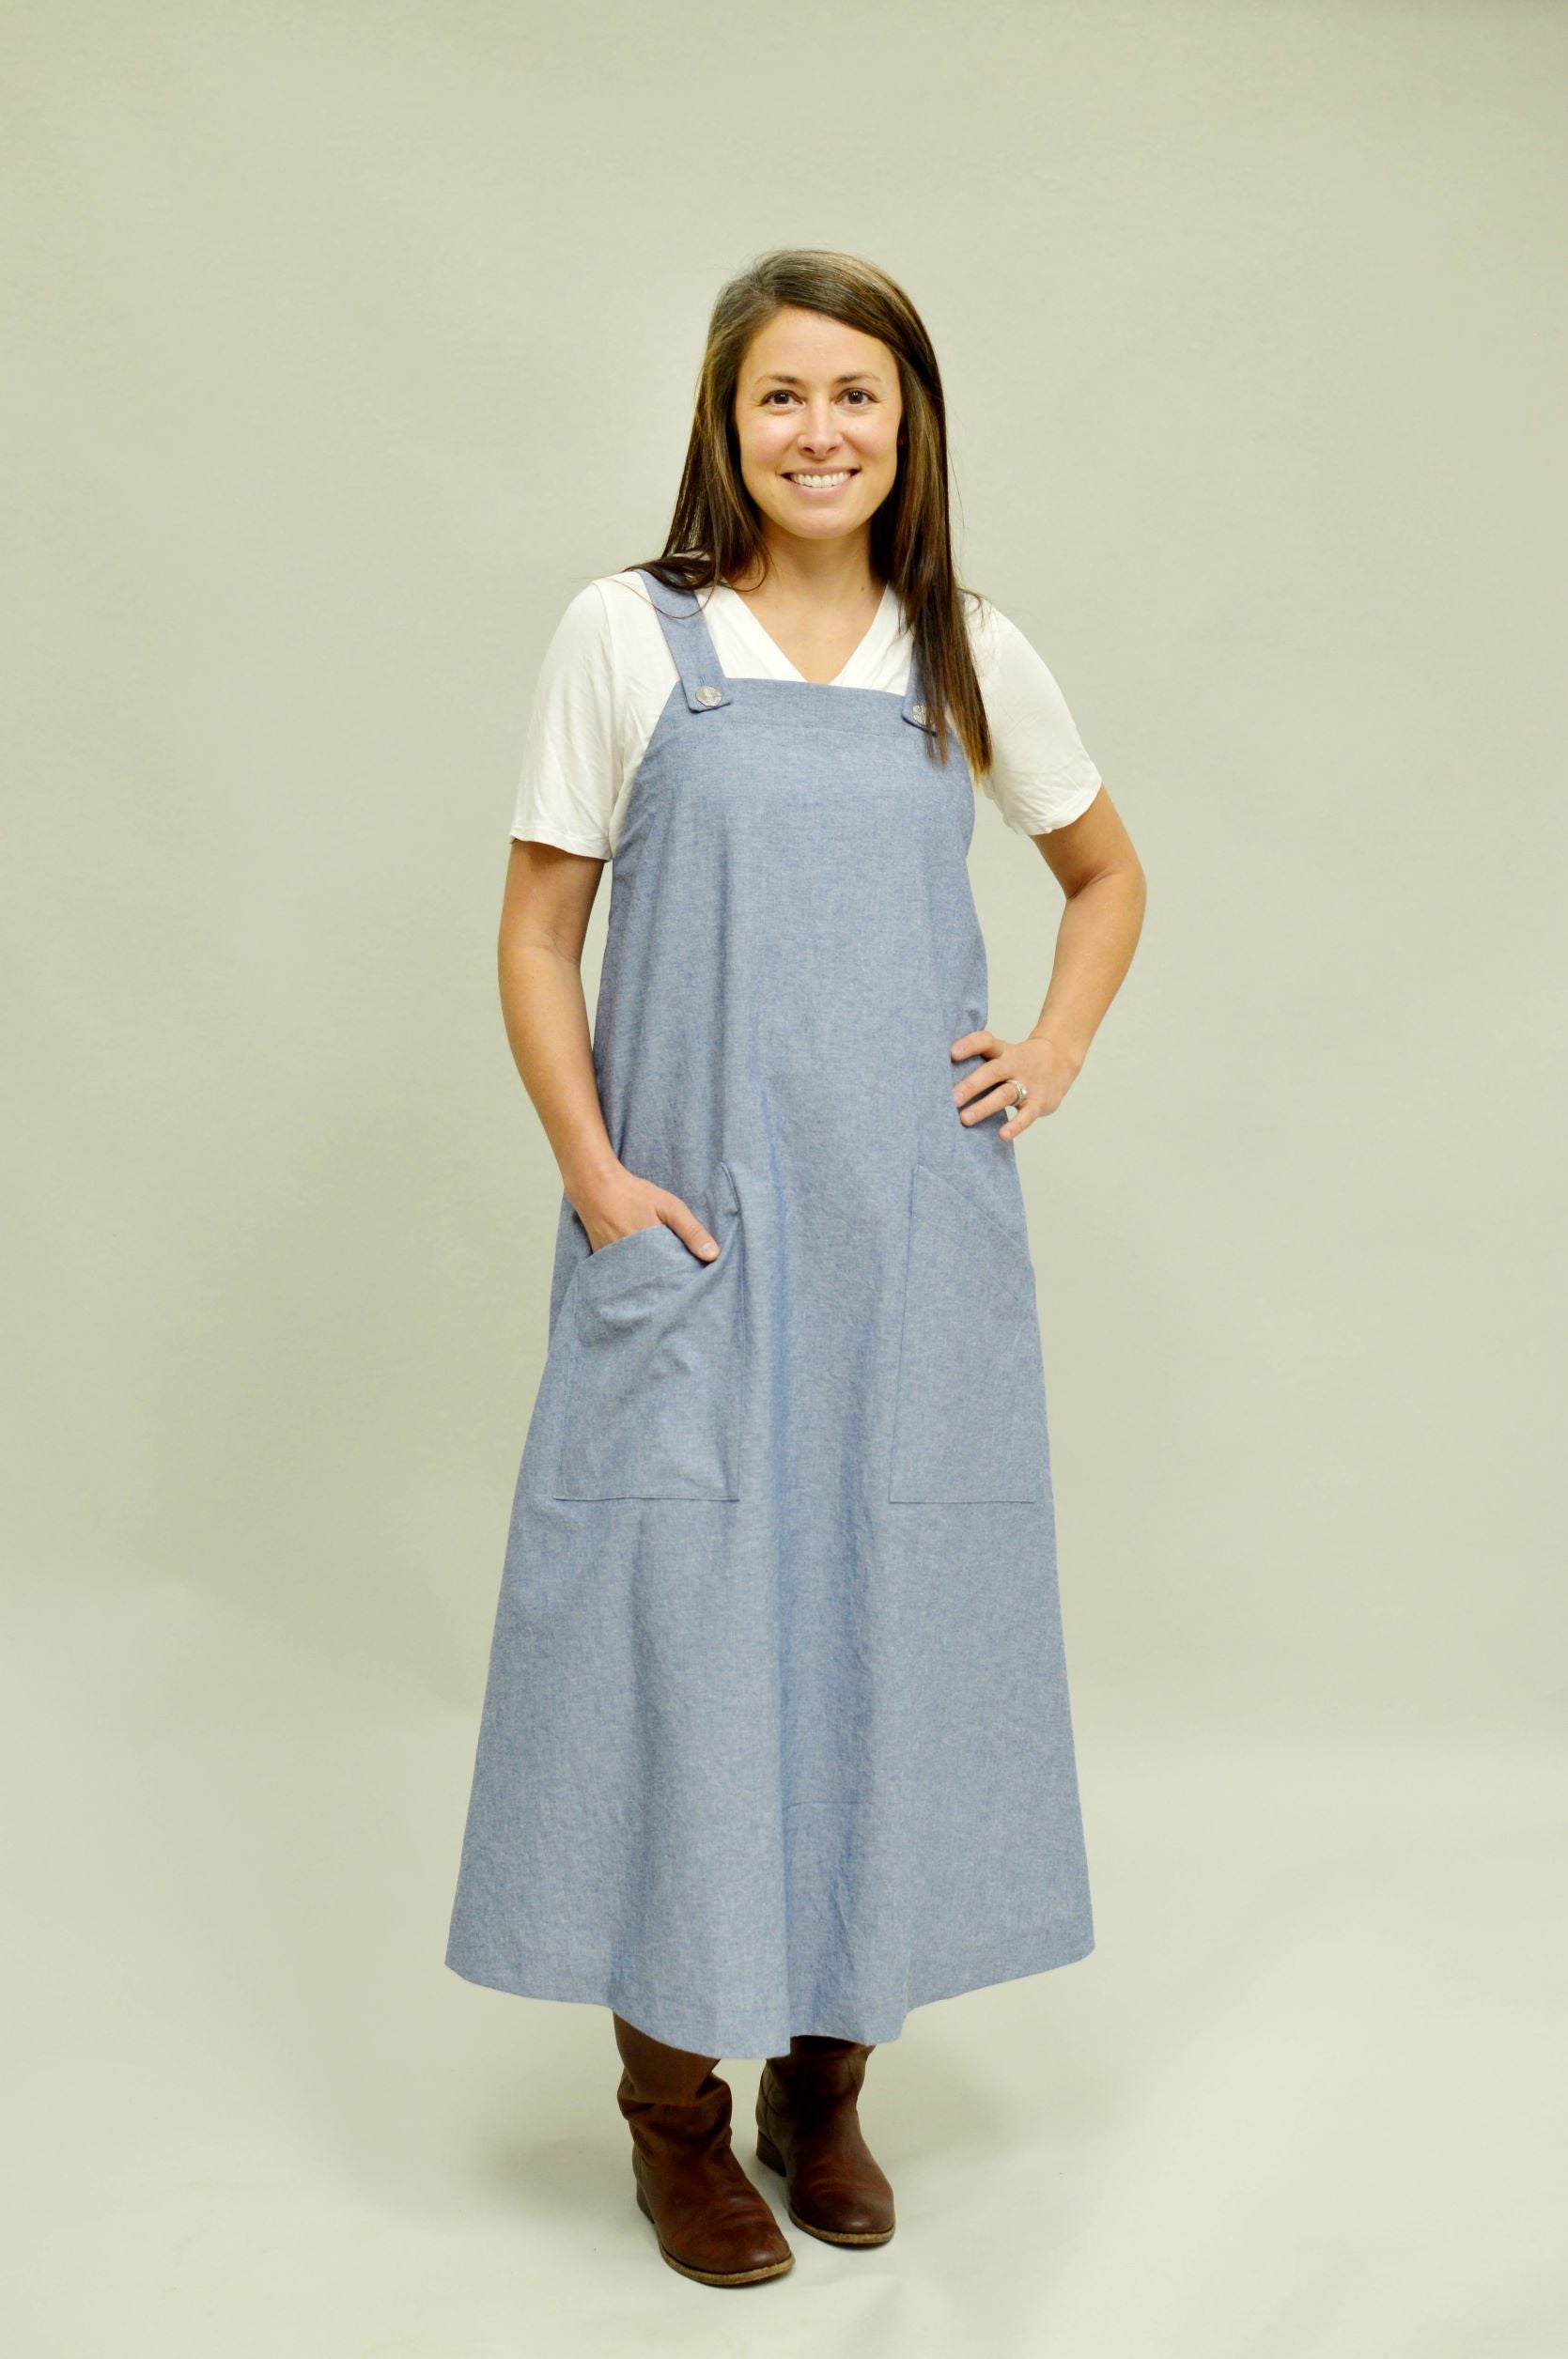 pinafore dresses for women